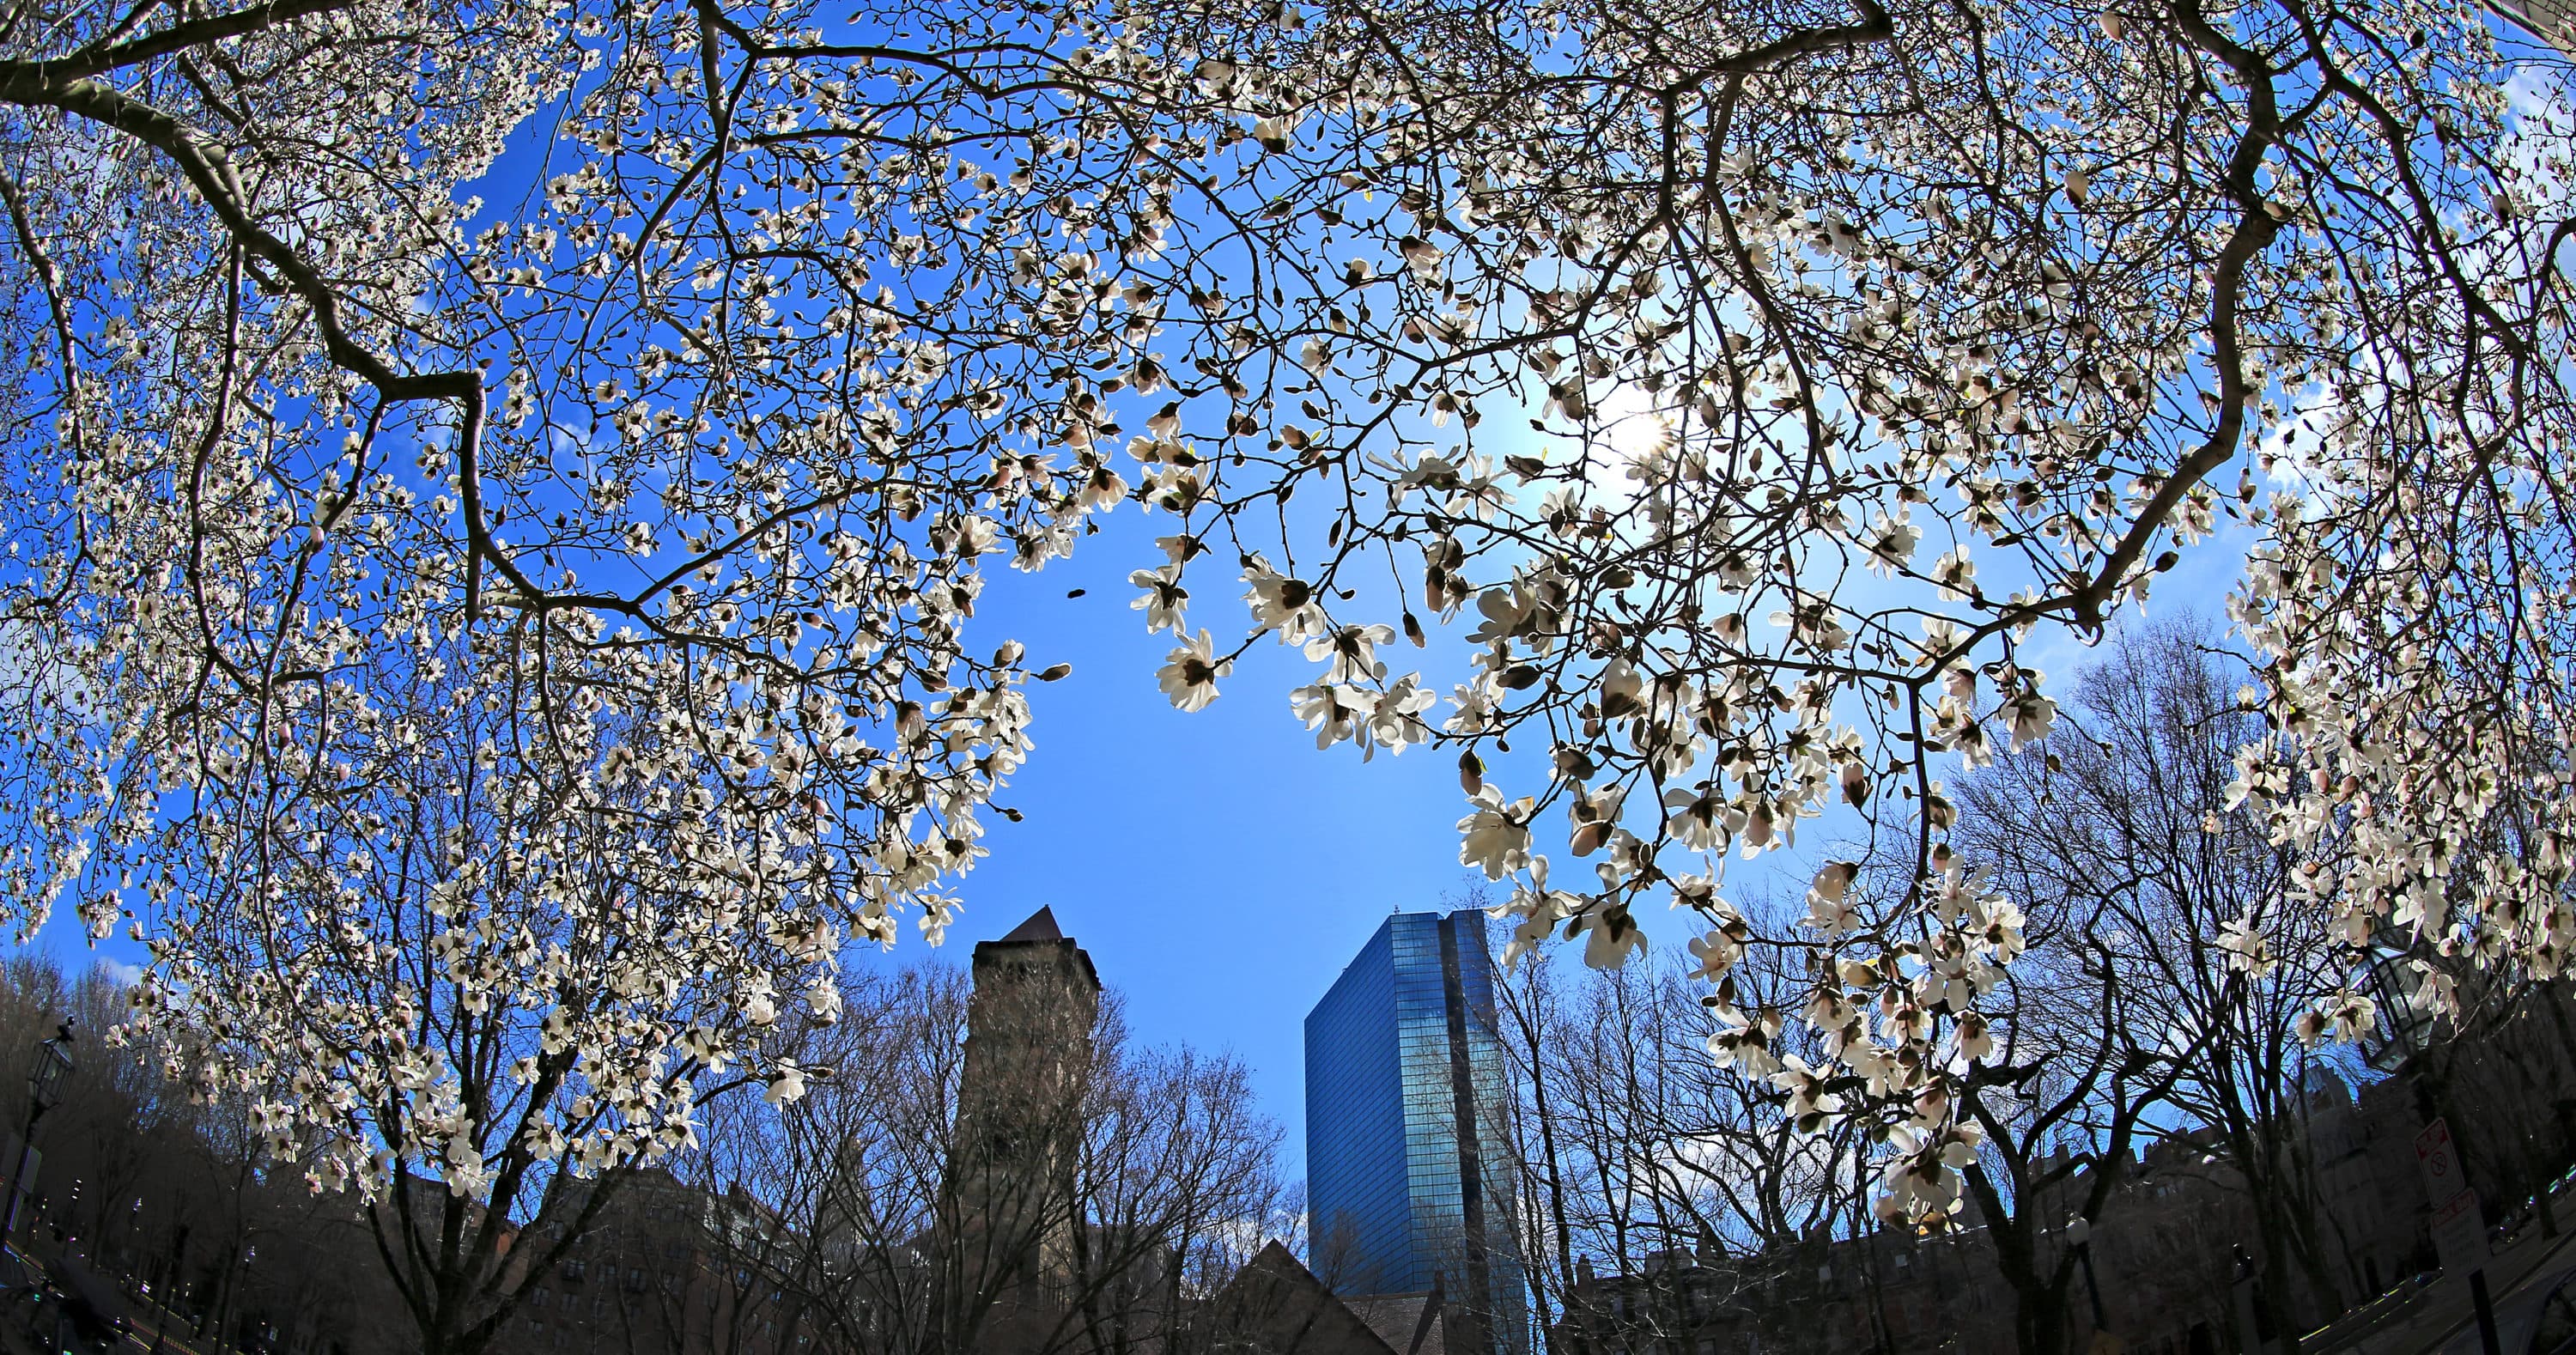 A flowering tree offers signs of spring on Commonwealth Avenue in Boston in early April. It's getting to be that time of year for people in Massachusetts who suffer from spring allergies. (David L. Ryan/The Boston Globe via Getty Images)